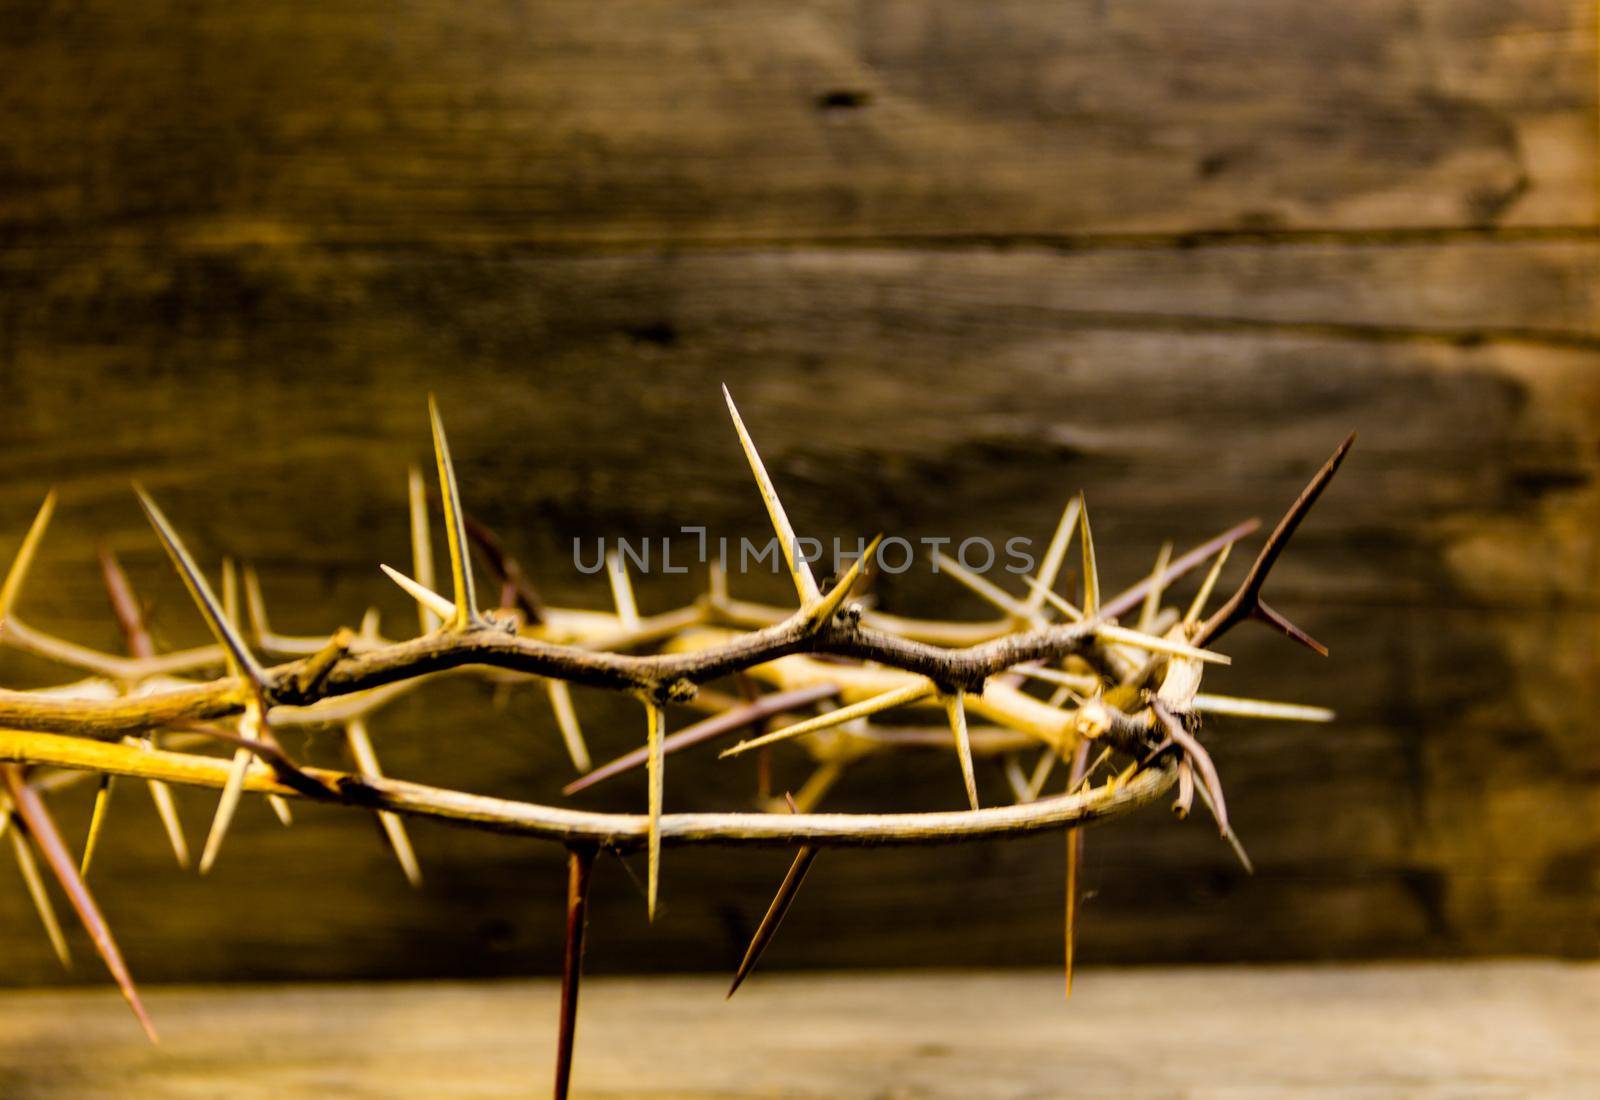 crown of thorns symbol of the christian religion by GabrielaBertolini